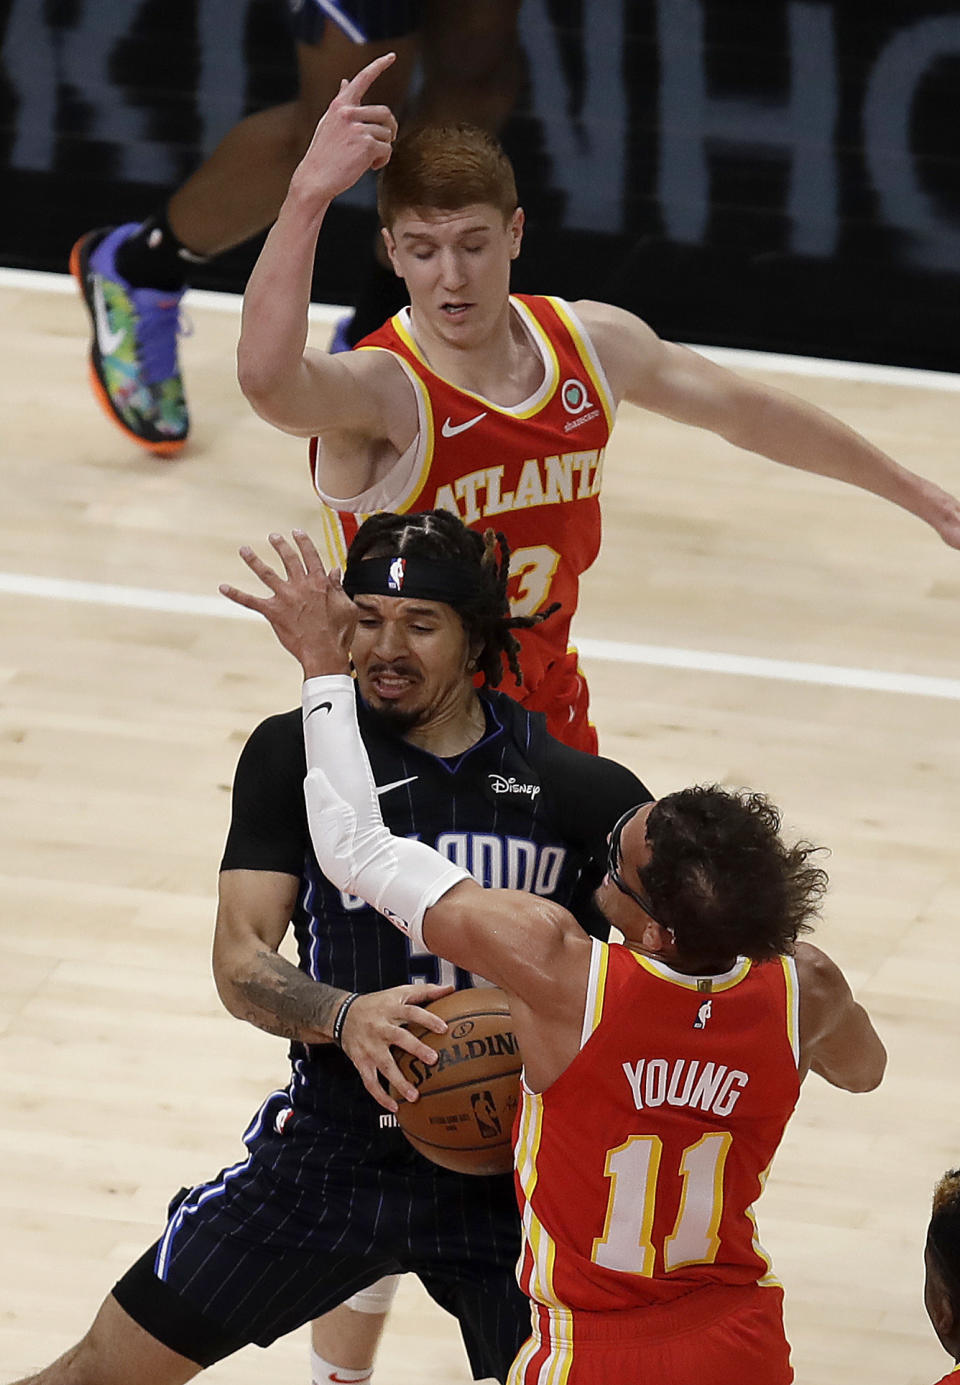 Orlando Magic guard Cole Anthony, center, drives the ball against Atlanta Hawks' Trae Young, right, in the first half of an NBA basketball game Tuesday, April 20, 2021, in Atlanta. (AP Photo/Ben Margot)